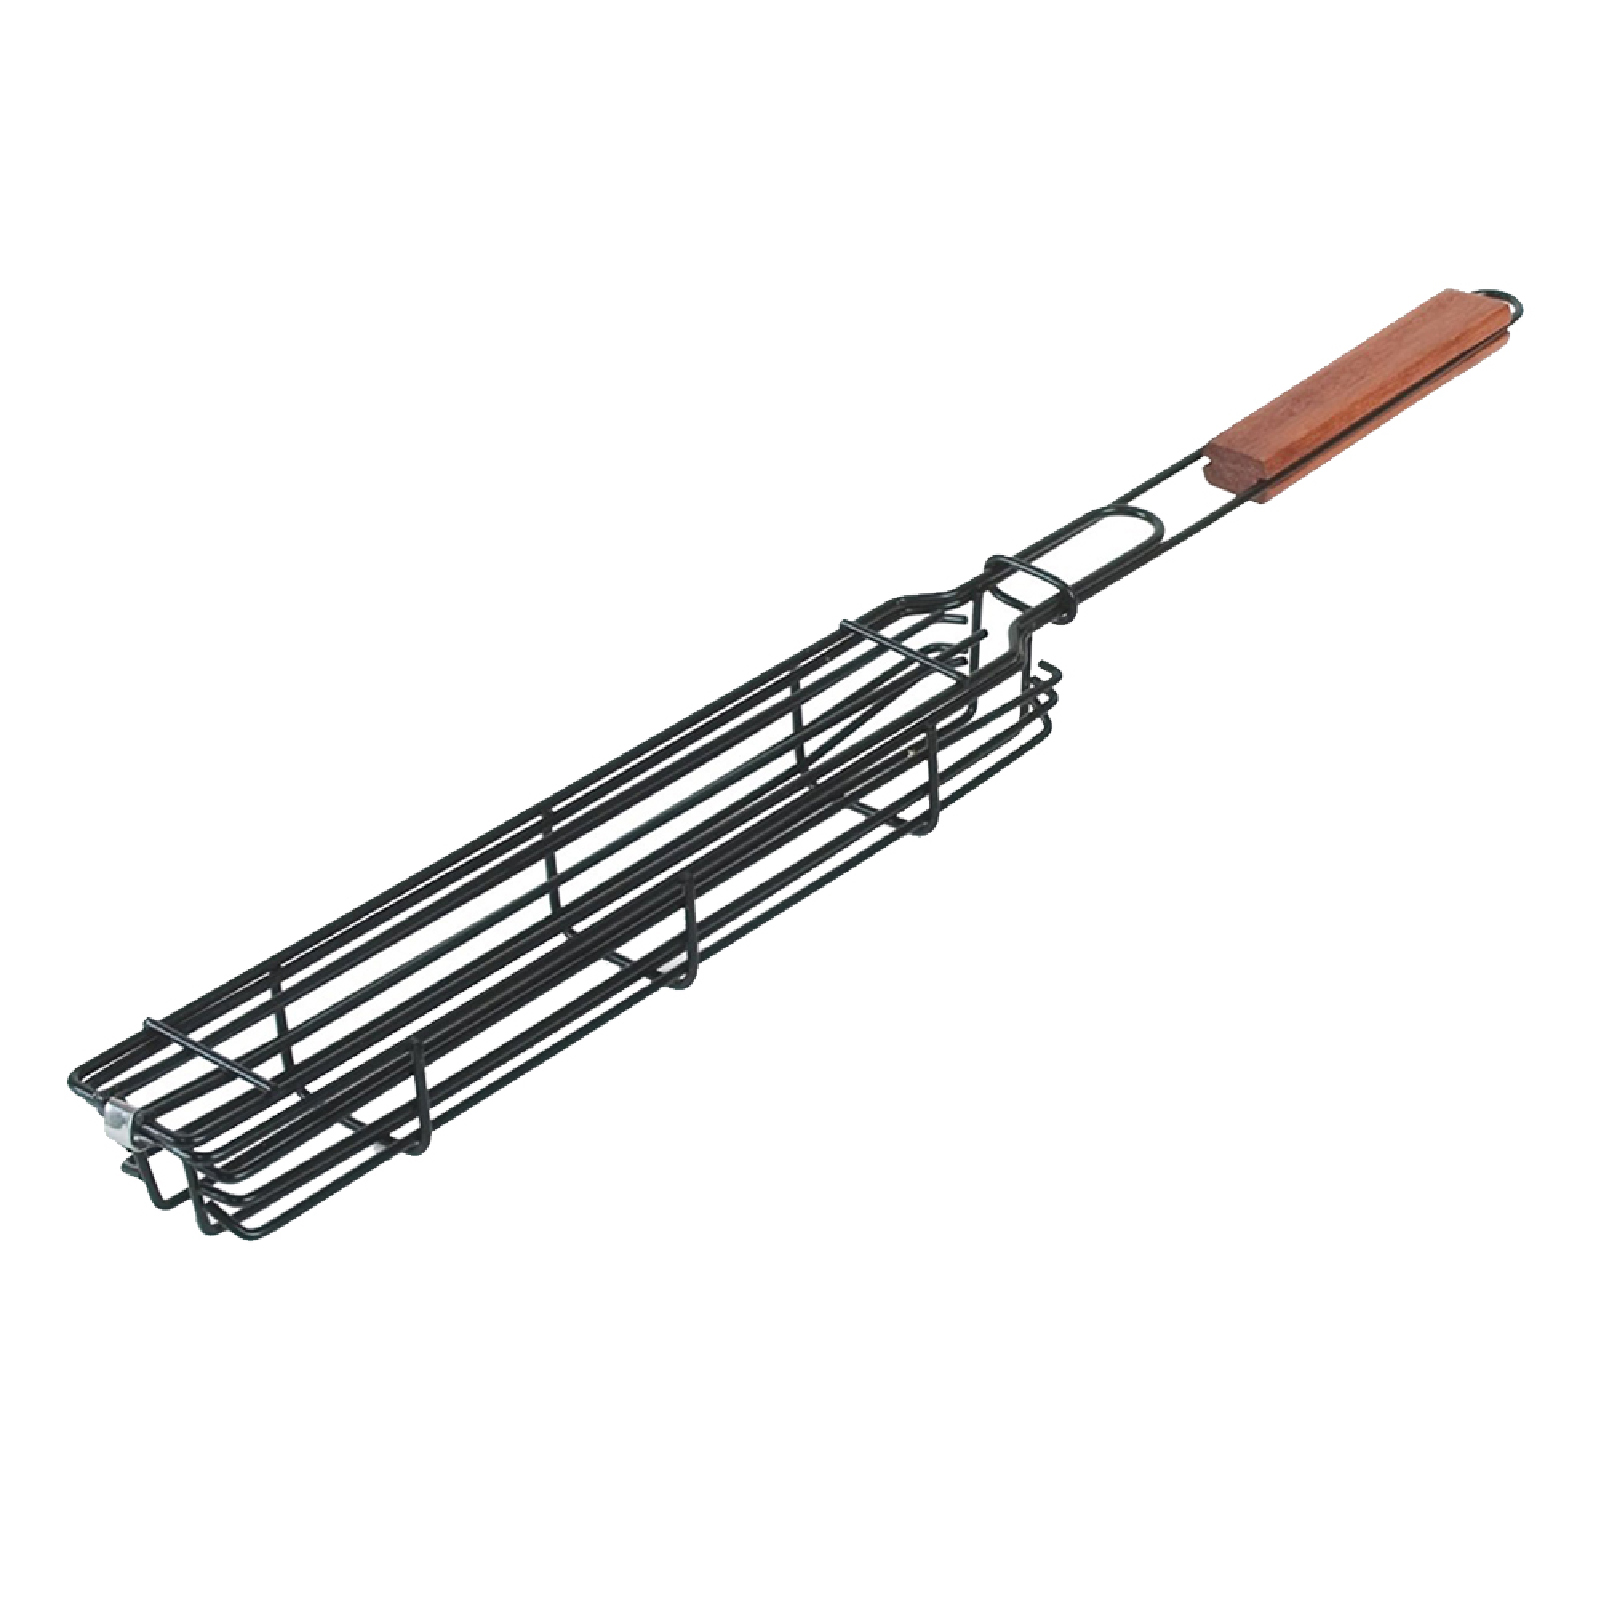 Cheers.US Grilling Basket, BBQ Grill Accessories Kabob Grilling Baskets tainless Steel Smoker Tube Grills, BBQ Smoker Rotisserie Basket for Grilling Vegetables - image 5 of 6